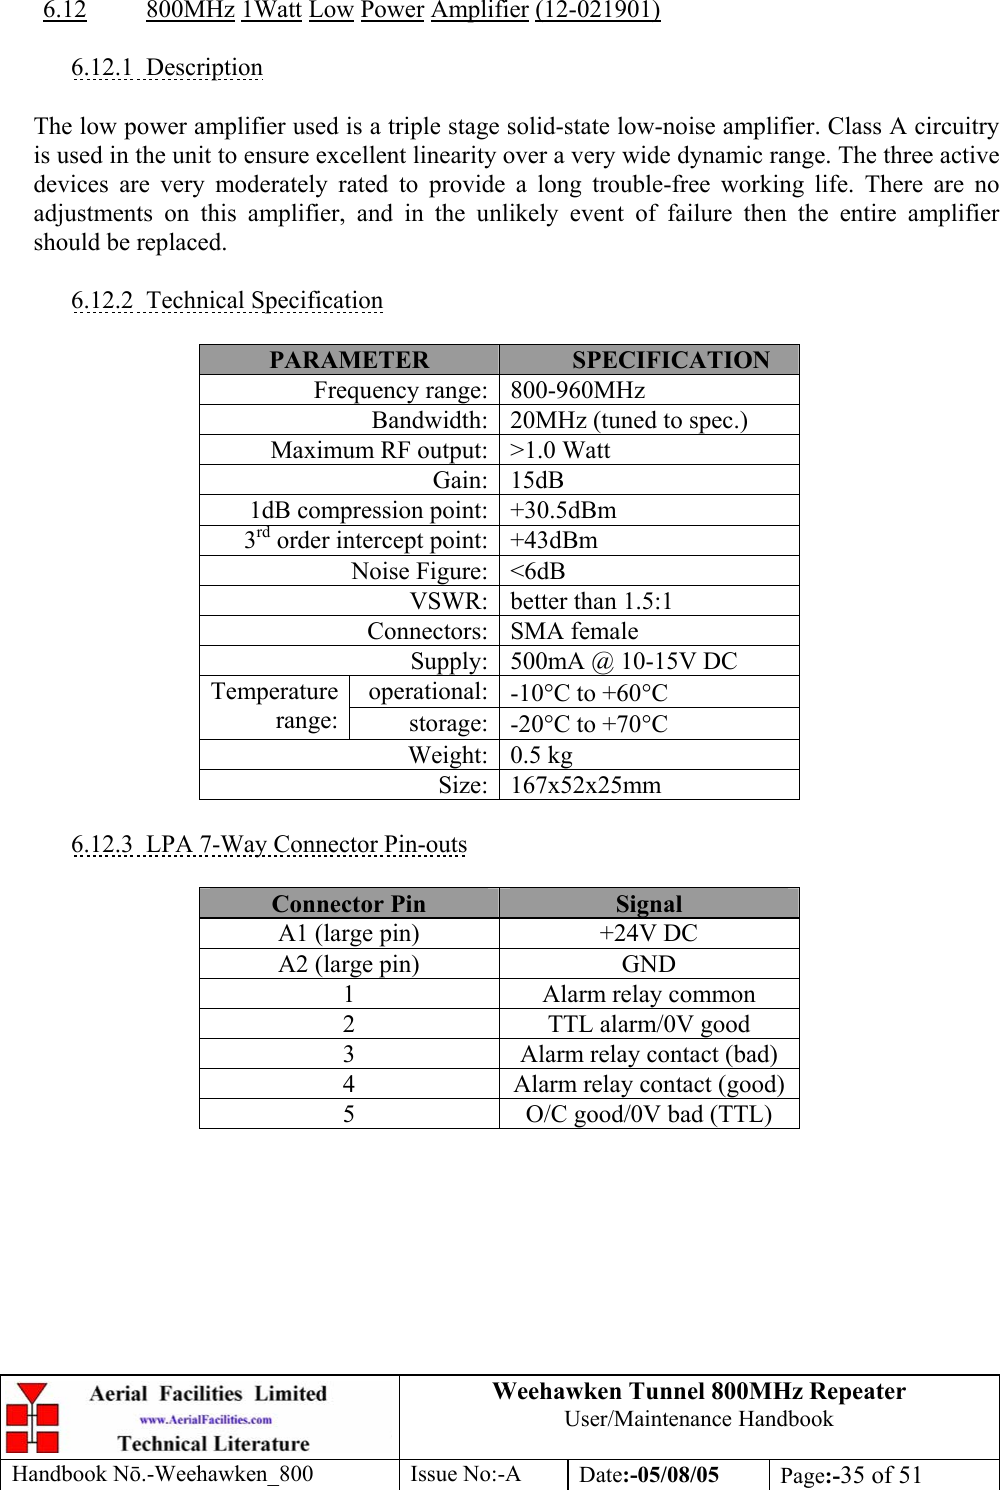 Weehawken Tunnel 800MHz Repeater User/Maintenance Handbook Handbook N.-Weehawken_800 Issue No:-A Date:-05/08/05  Page:-35 of 51   6.12 800MHz 1Watt Low Power Amplifier (12-021901)  6.12.1 Description  The low power amplifier used is a triple stage solid-state low-noise amplifier. Class A circuitry is used in the unit to ensure excellent linearity over a very wide dynamic range. The three active devices are very moderately rated to provide a long trouble-free working life. There are no adjustments on this amplifier, and in the unlikely event of failure then the entire amplifier should be replaced.  6.12.2 Technical Specification  PARAMETER  SPECIFICATION Frequency range: 800-960MHz Bandwidth: 20MHz (tuned to spec.) Maximum RF output: &gt;1.0 Watt Gain: 15dB 1dB compression point: +30.5dBm 3rd order intercept point: +43dBm Noise Figure: &lt;6dB VSWR: better than 1.5:1 Connectors: SMA female Supply: 500mA @ 10-15V DC operational: -10°C to +60°C Temperature range:  storage: -20°C to +70°C Weight: 0.5 kg Size: 167x52x25mm  6.12.3  LPA 7-Way Connector Pin-outs  Connector Pin  Signal A1 (large pin)  +24V DC A2 (large pin)  GND 1  Alarm relay common 2  TTL alarm/0V good 3  Alarm relay contact (bad) 4  Alarm relay contact (good) 5  O/C good/0V bad (TTL)  